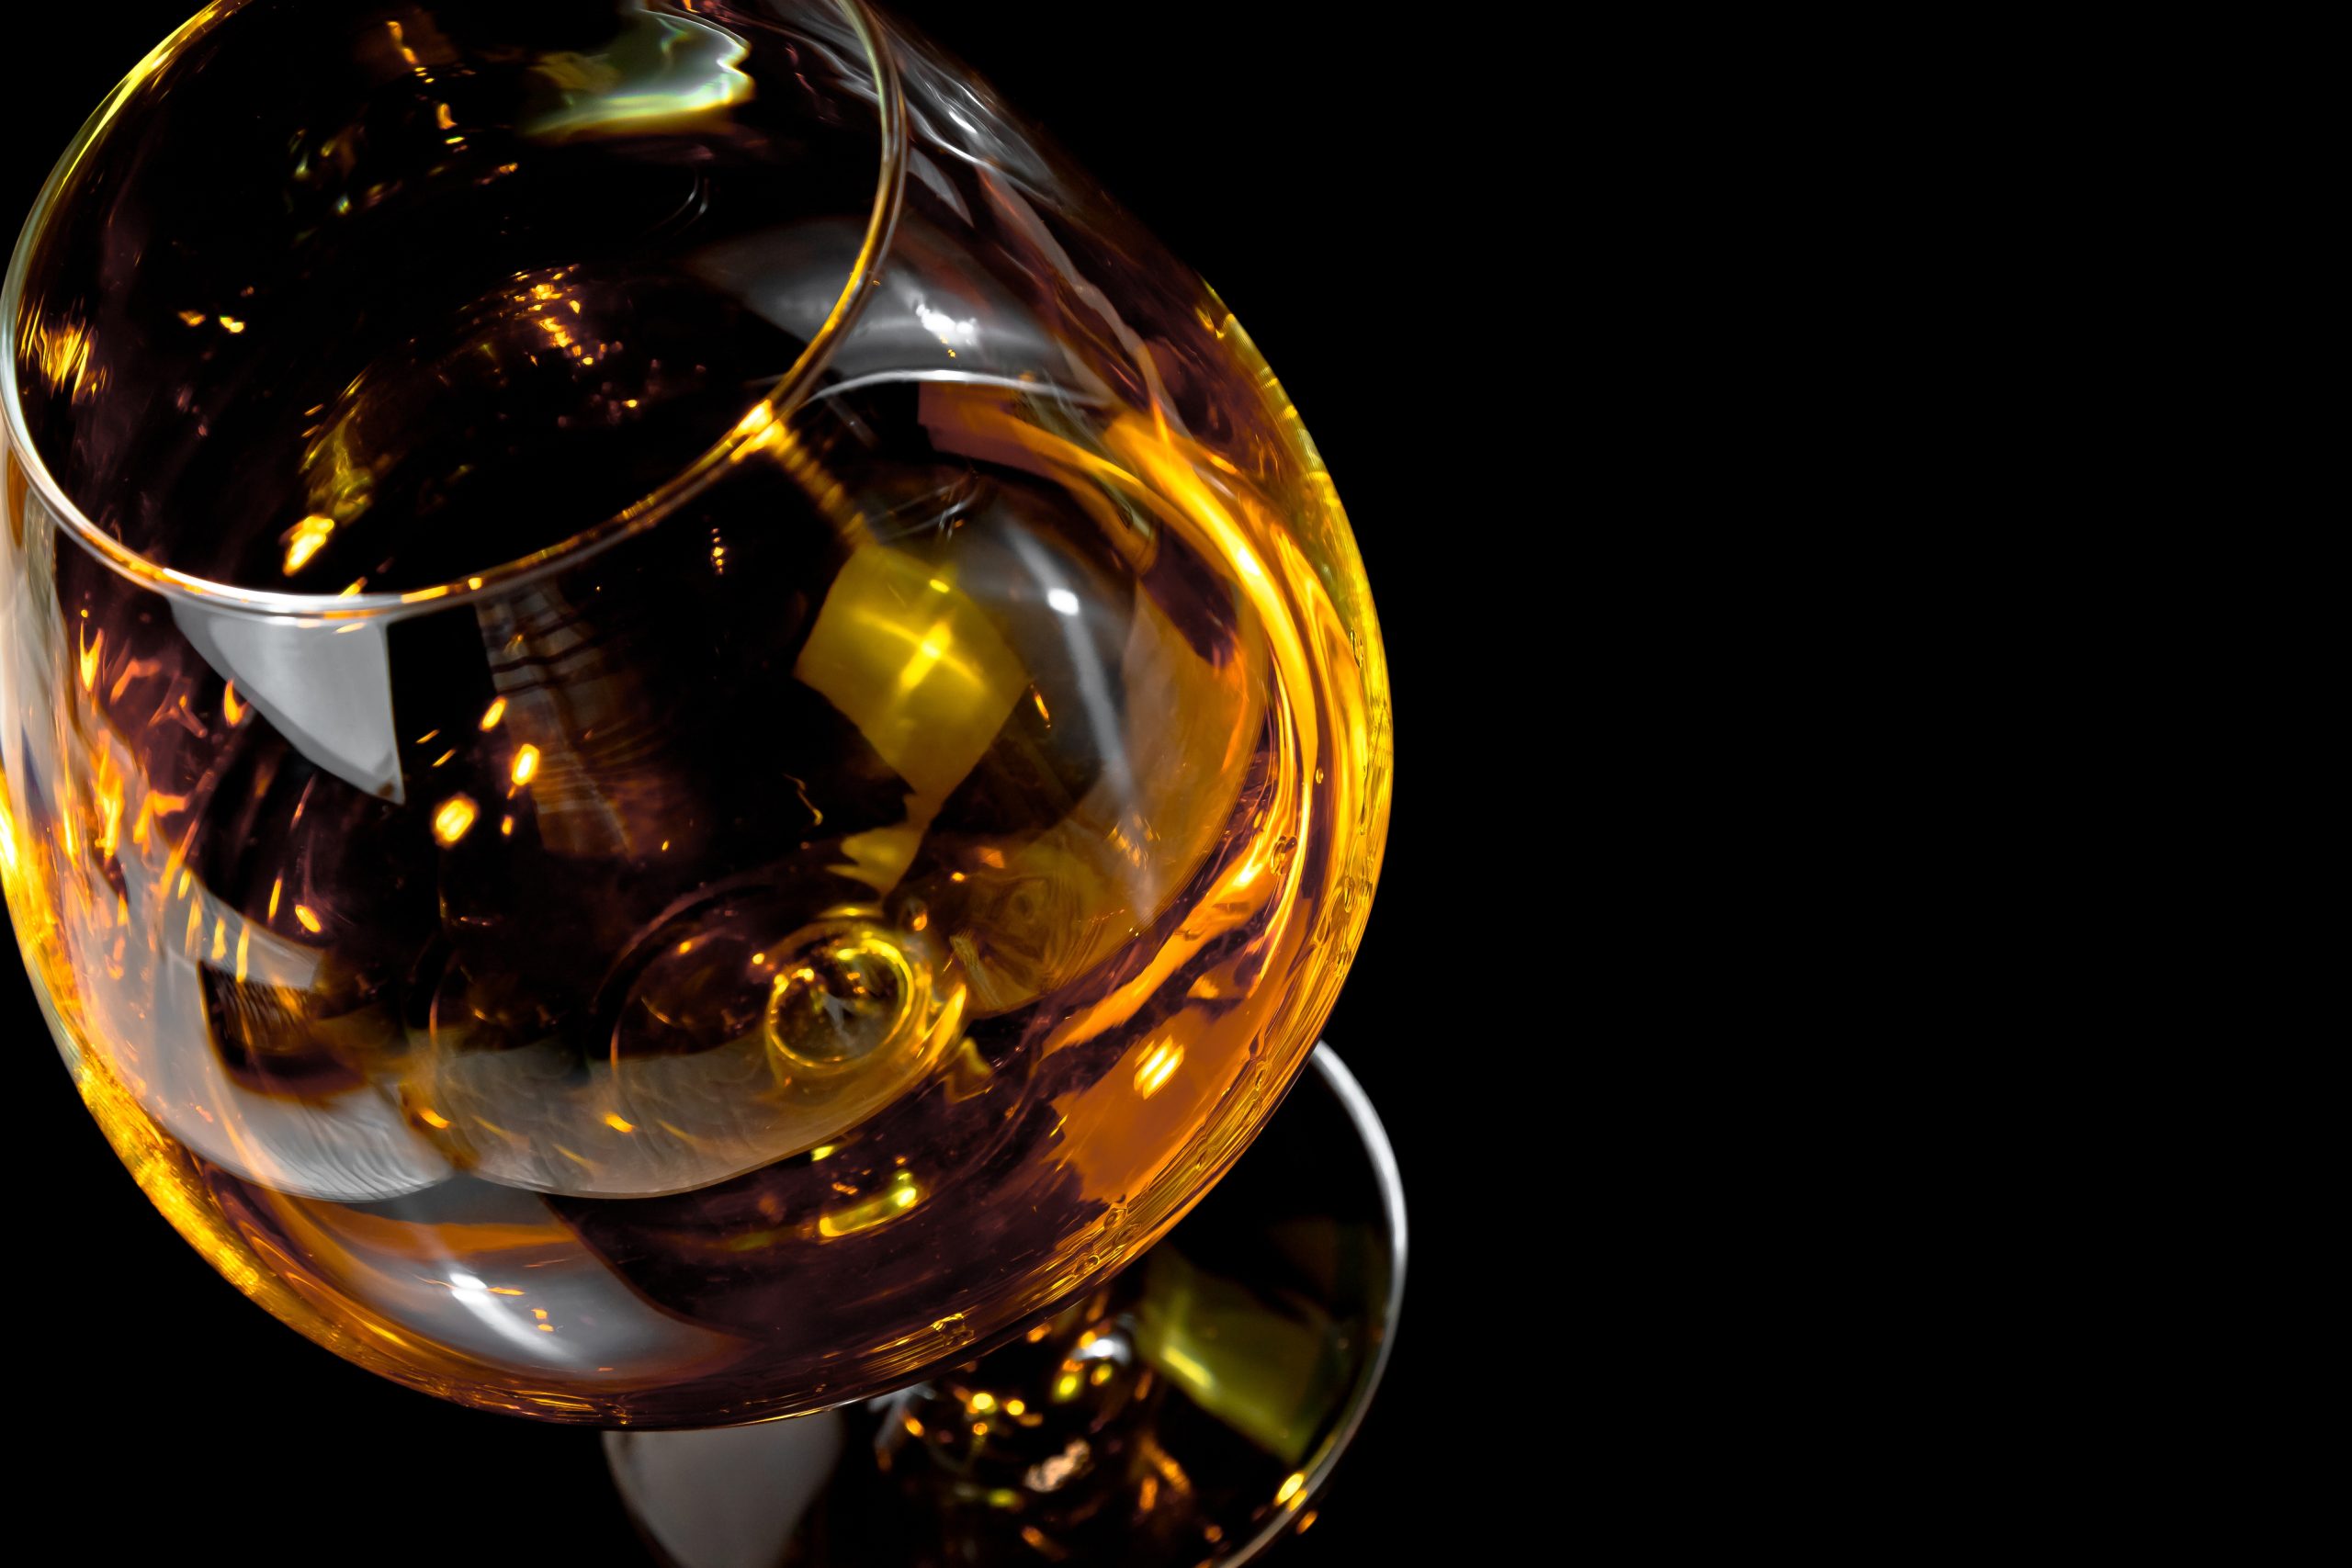 THIS YEAR COGNAC HENNESSY EXPECTS TO SELL MORE IN THE USA THAN THE 4  MILLION CASES SOLD IN 2014